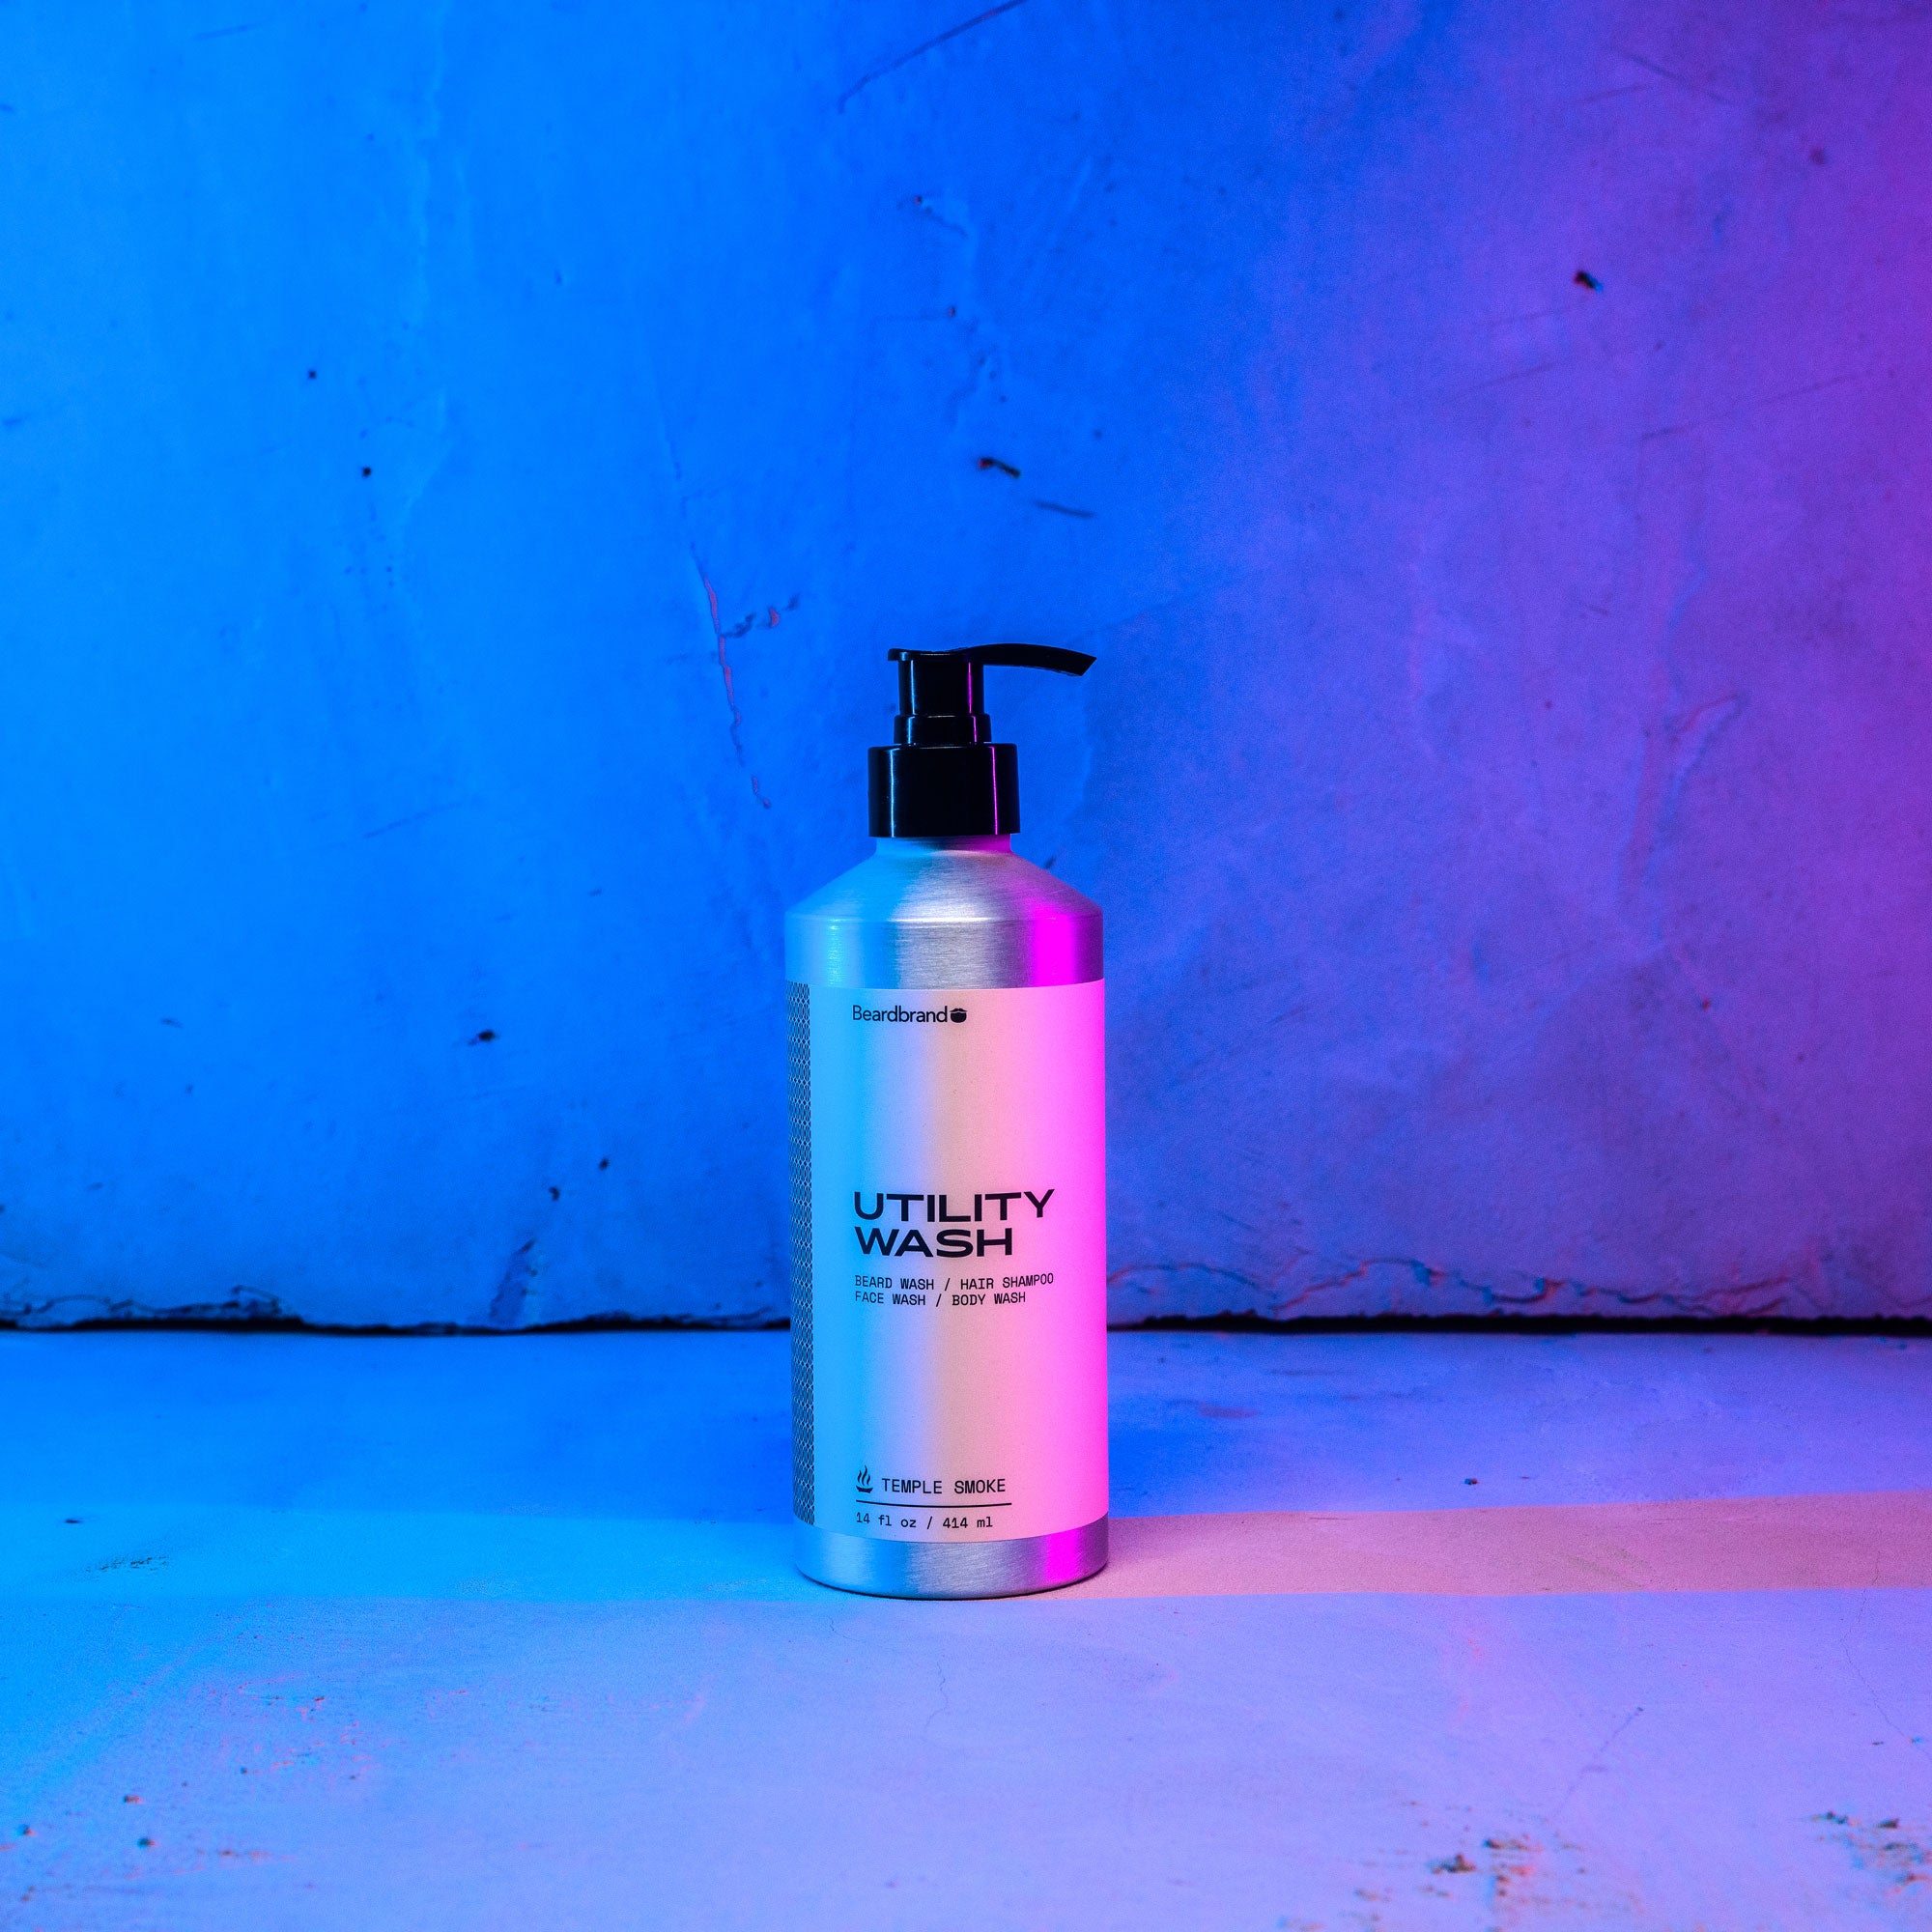 Beardbrand's Utility Wash set on a concrete backdrop highlighted in blue and pink lighting with the label facing forward.